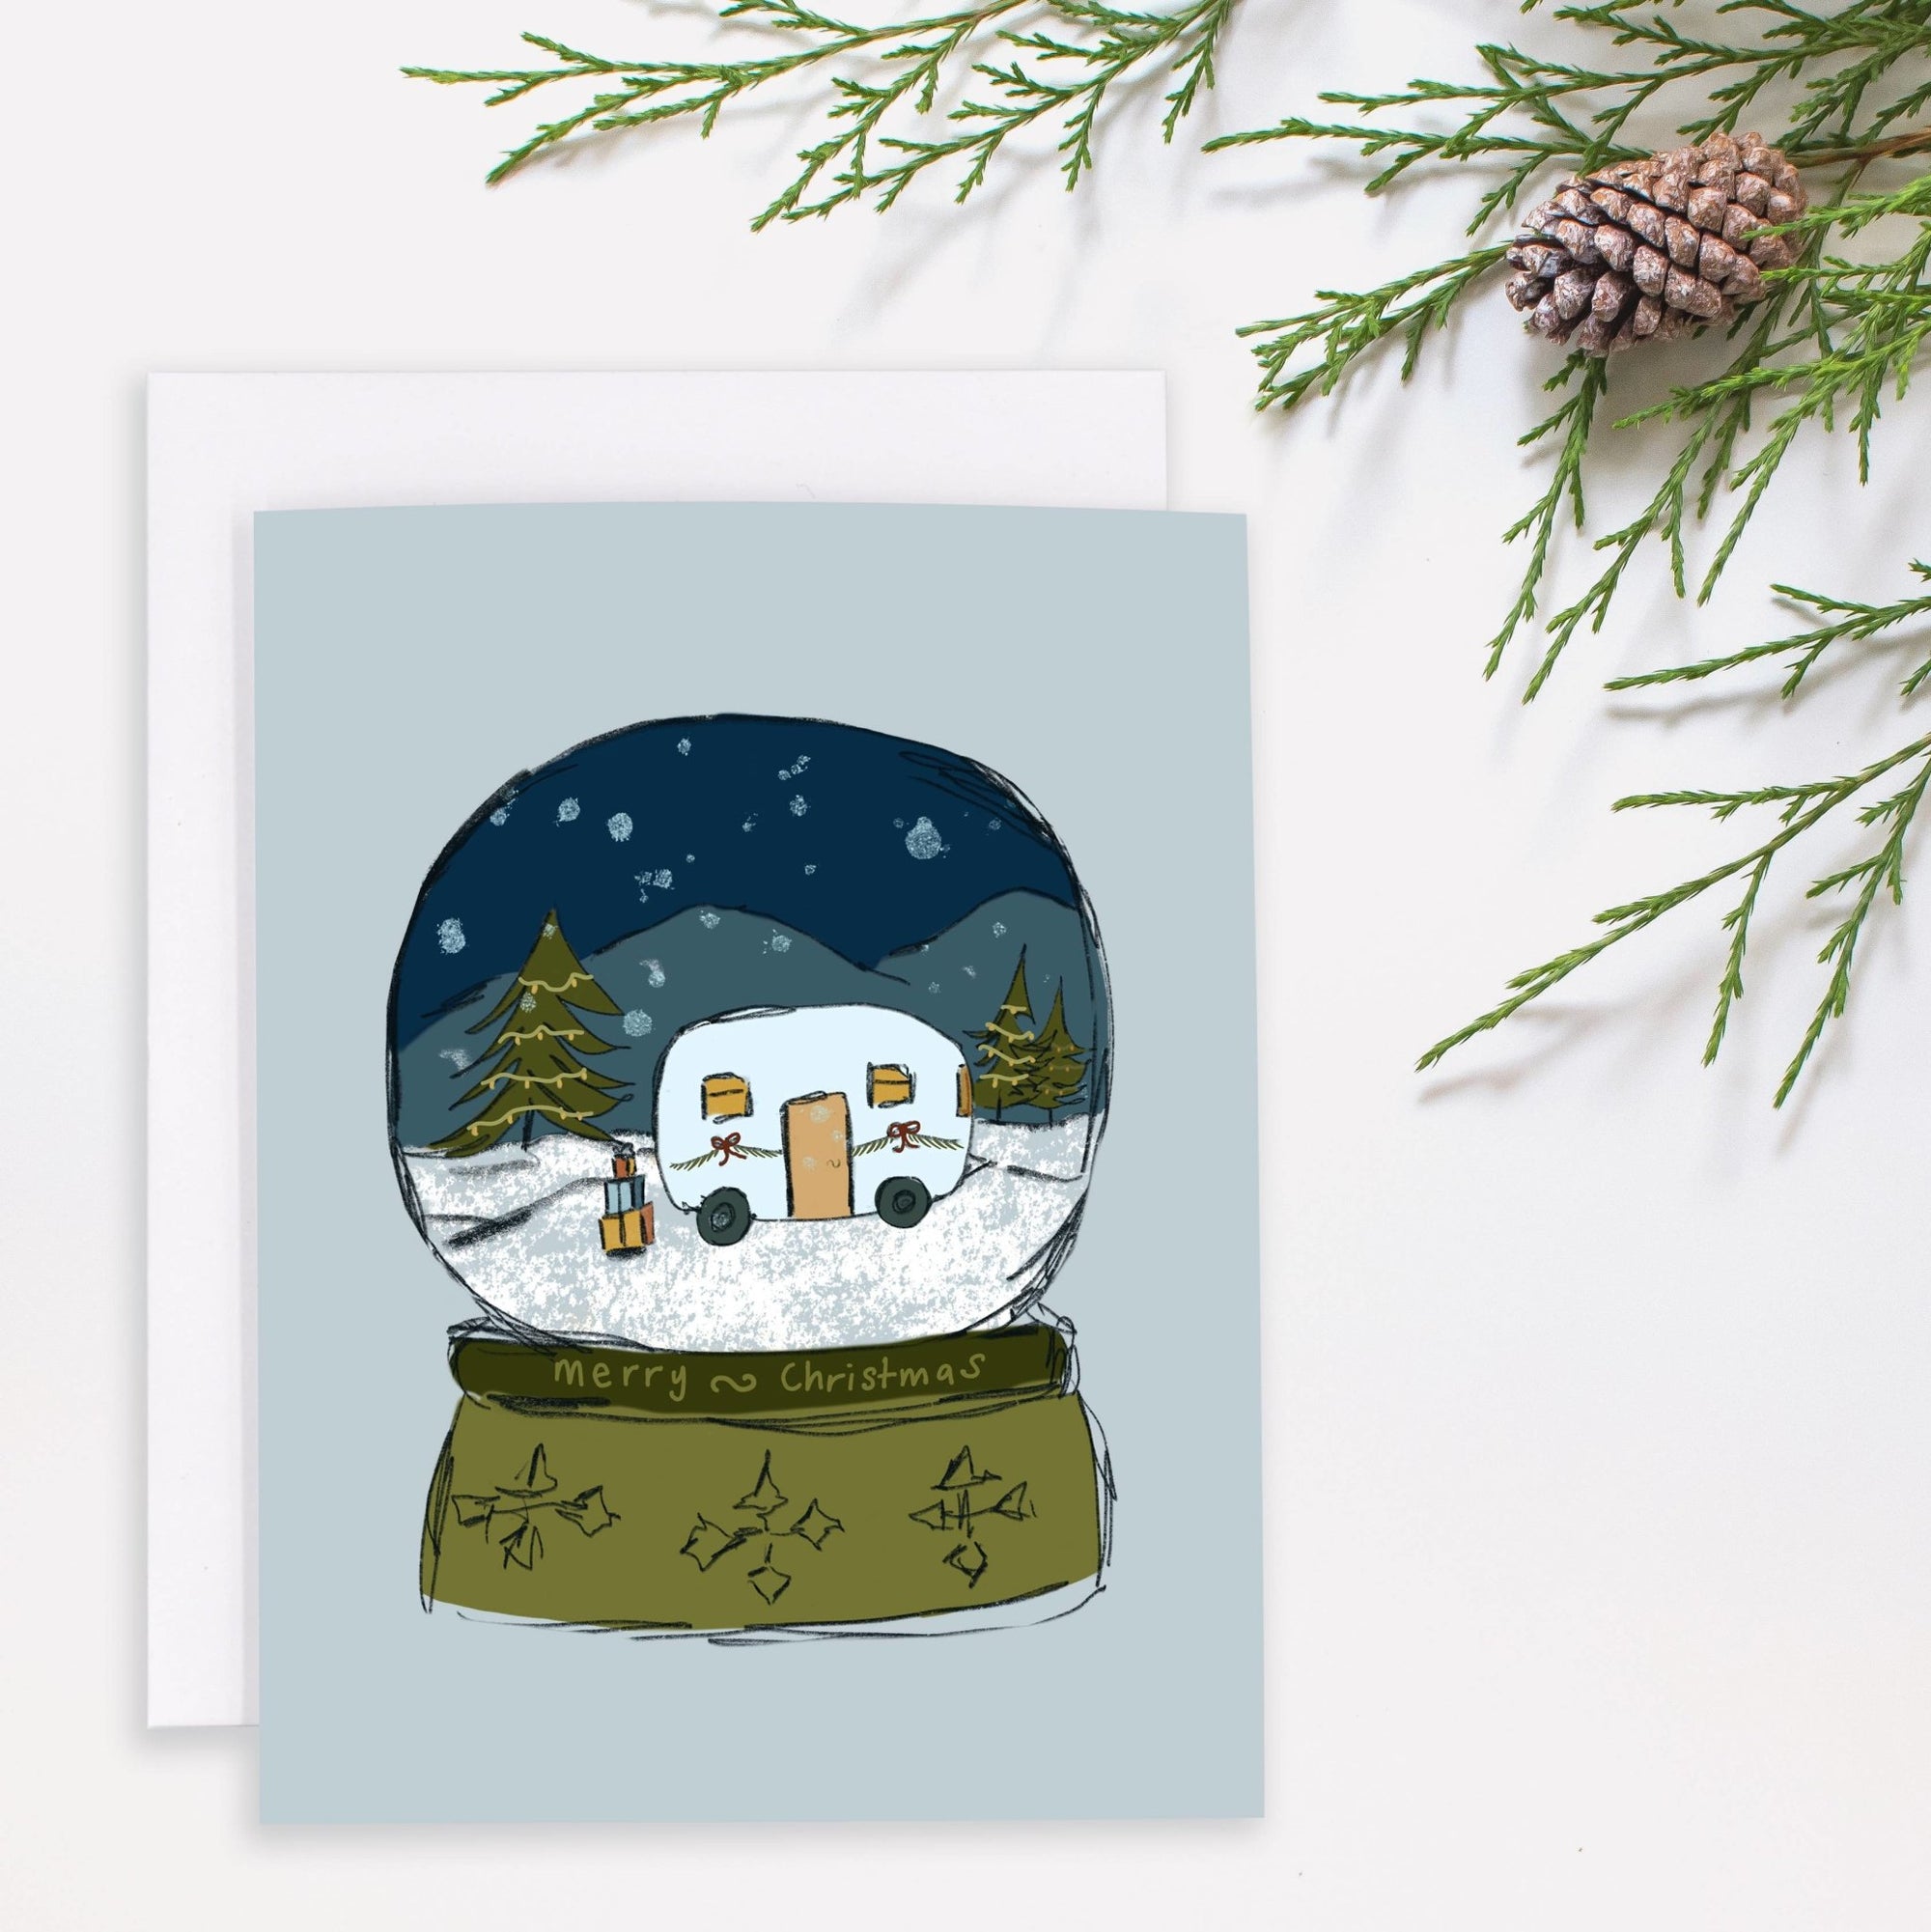 Merry Christmas Snowglobe Card - Gift & Gather